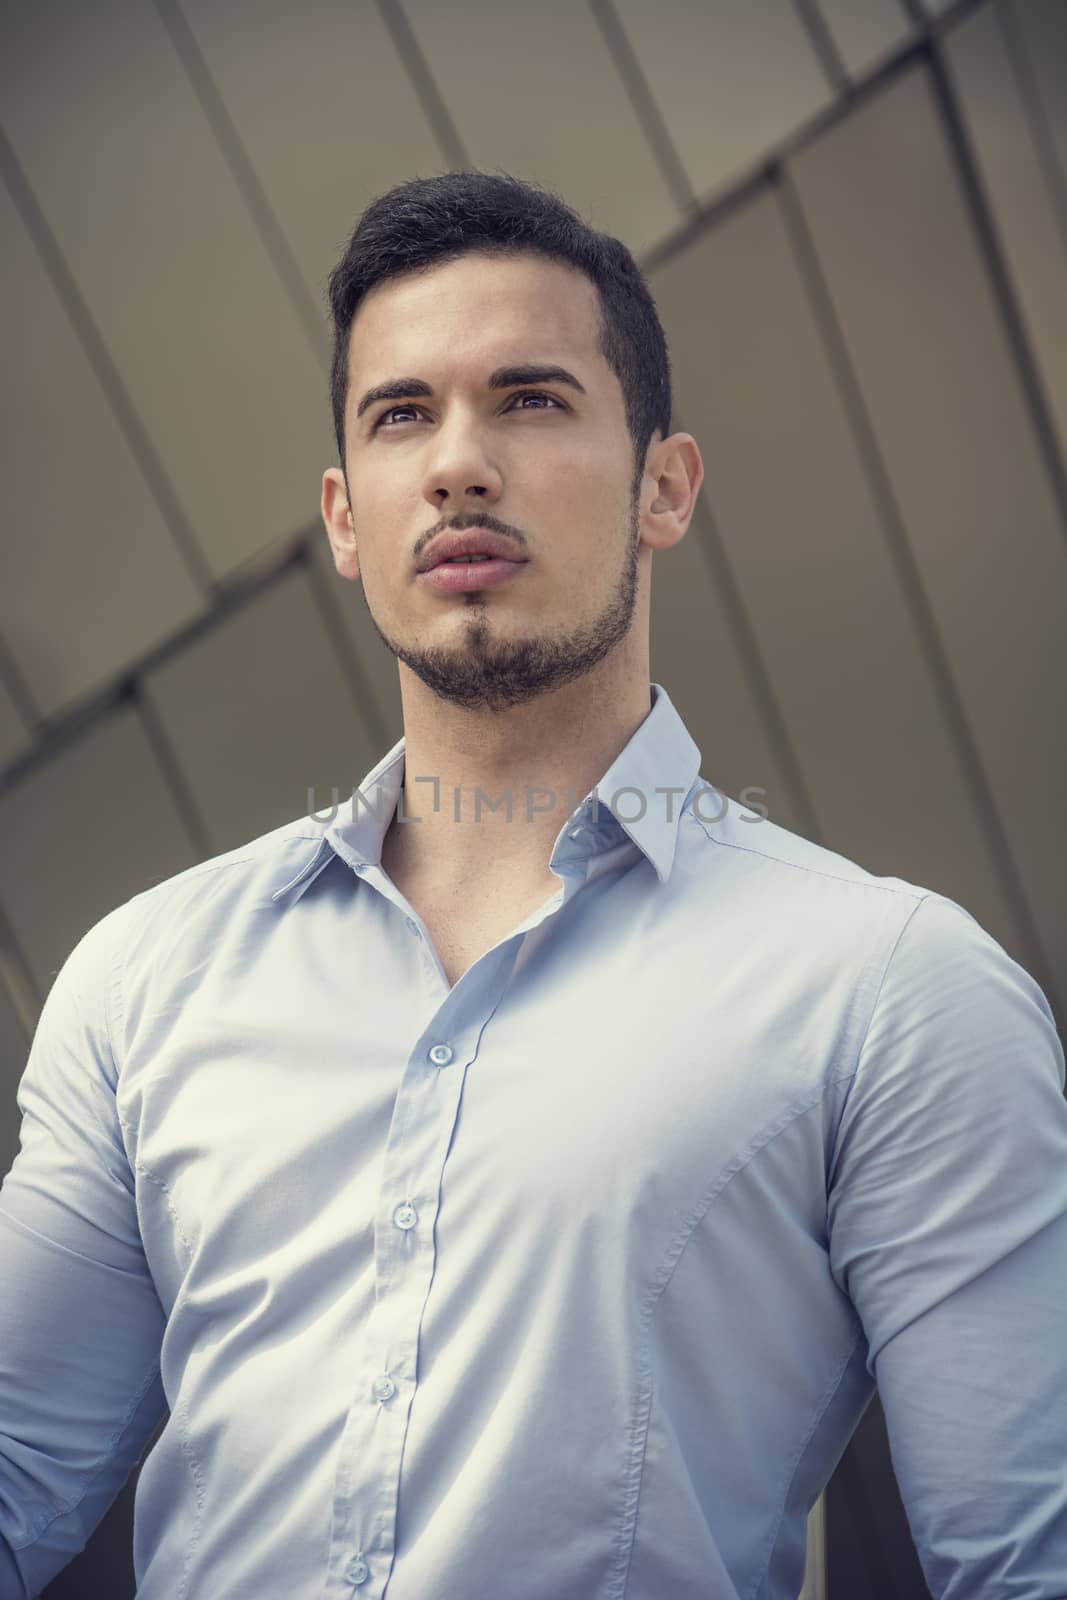 Handsome young man outside wearing shirt by artofphoto